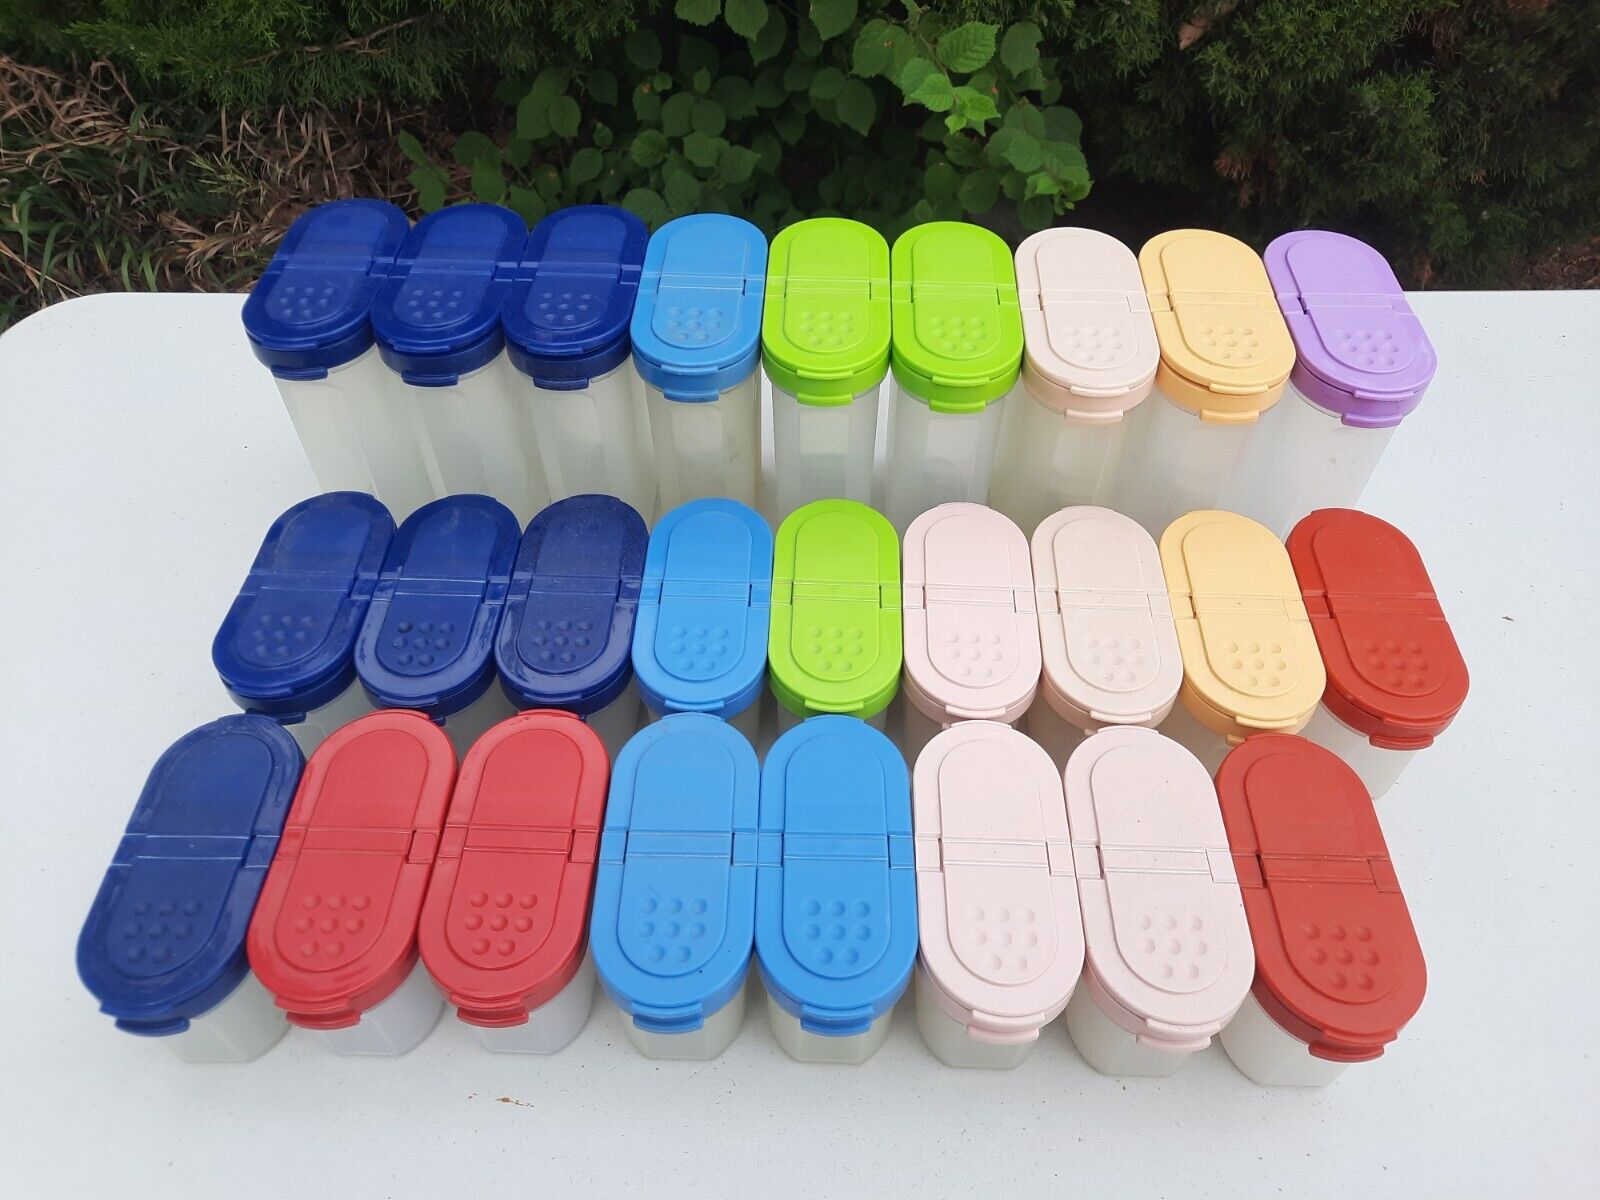 Lot of 26 Tupperware Modular Mates Spice Containers 1843 1846 Mixed Colors